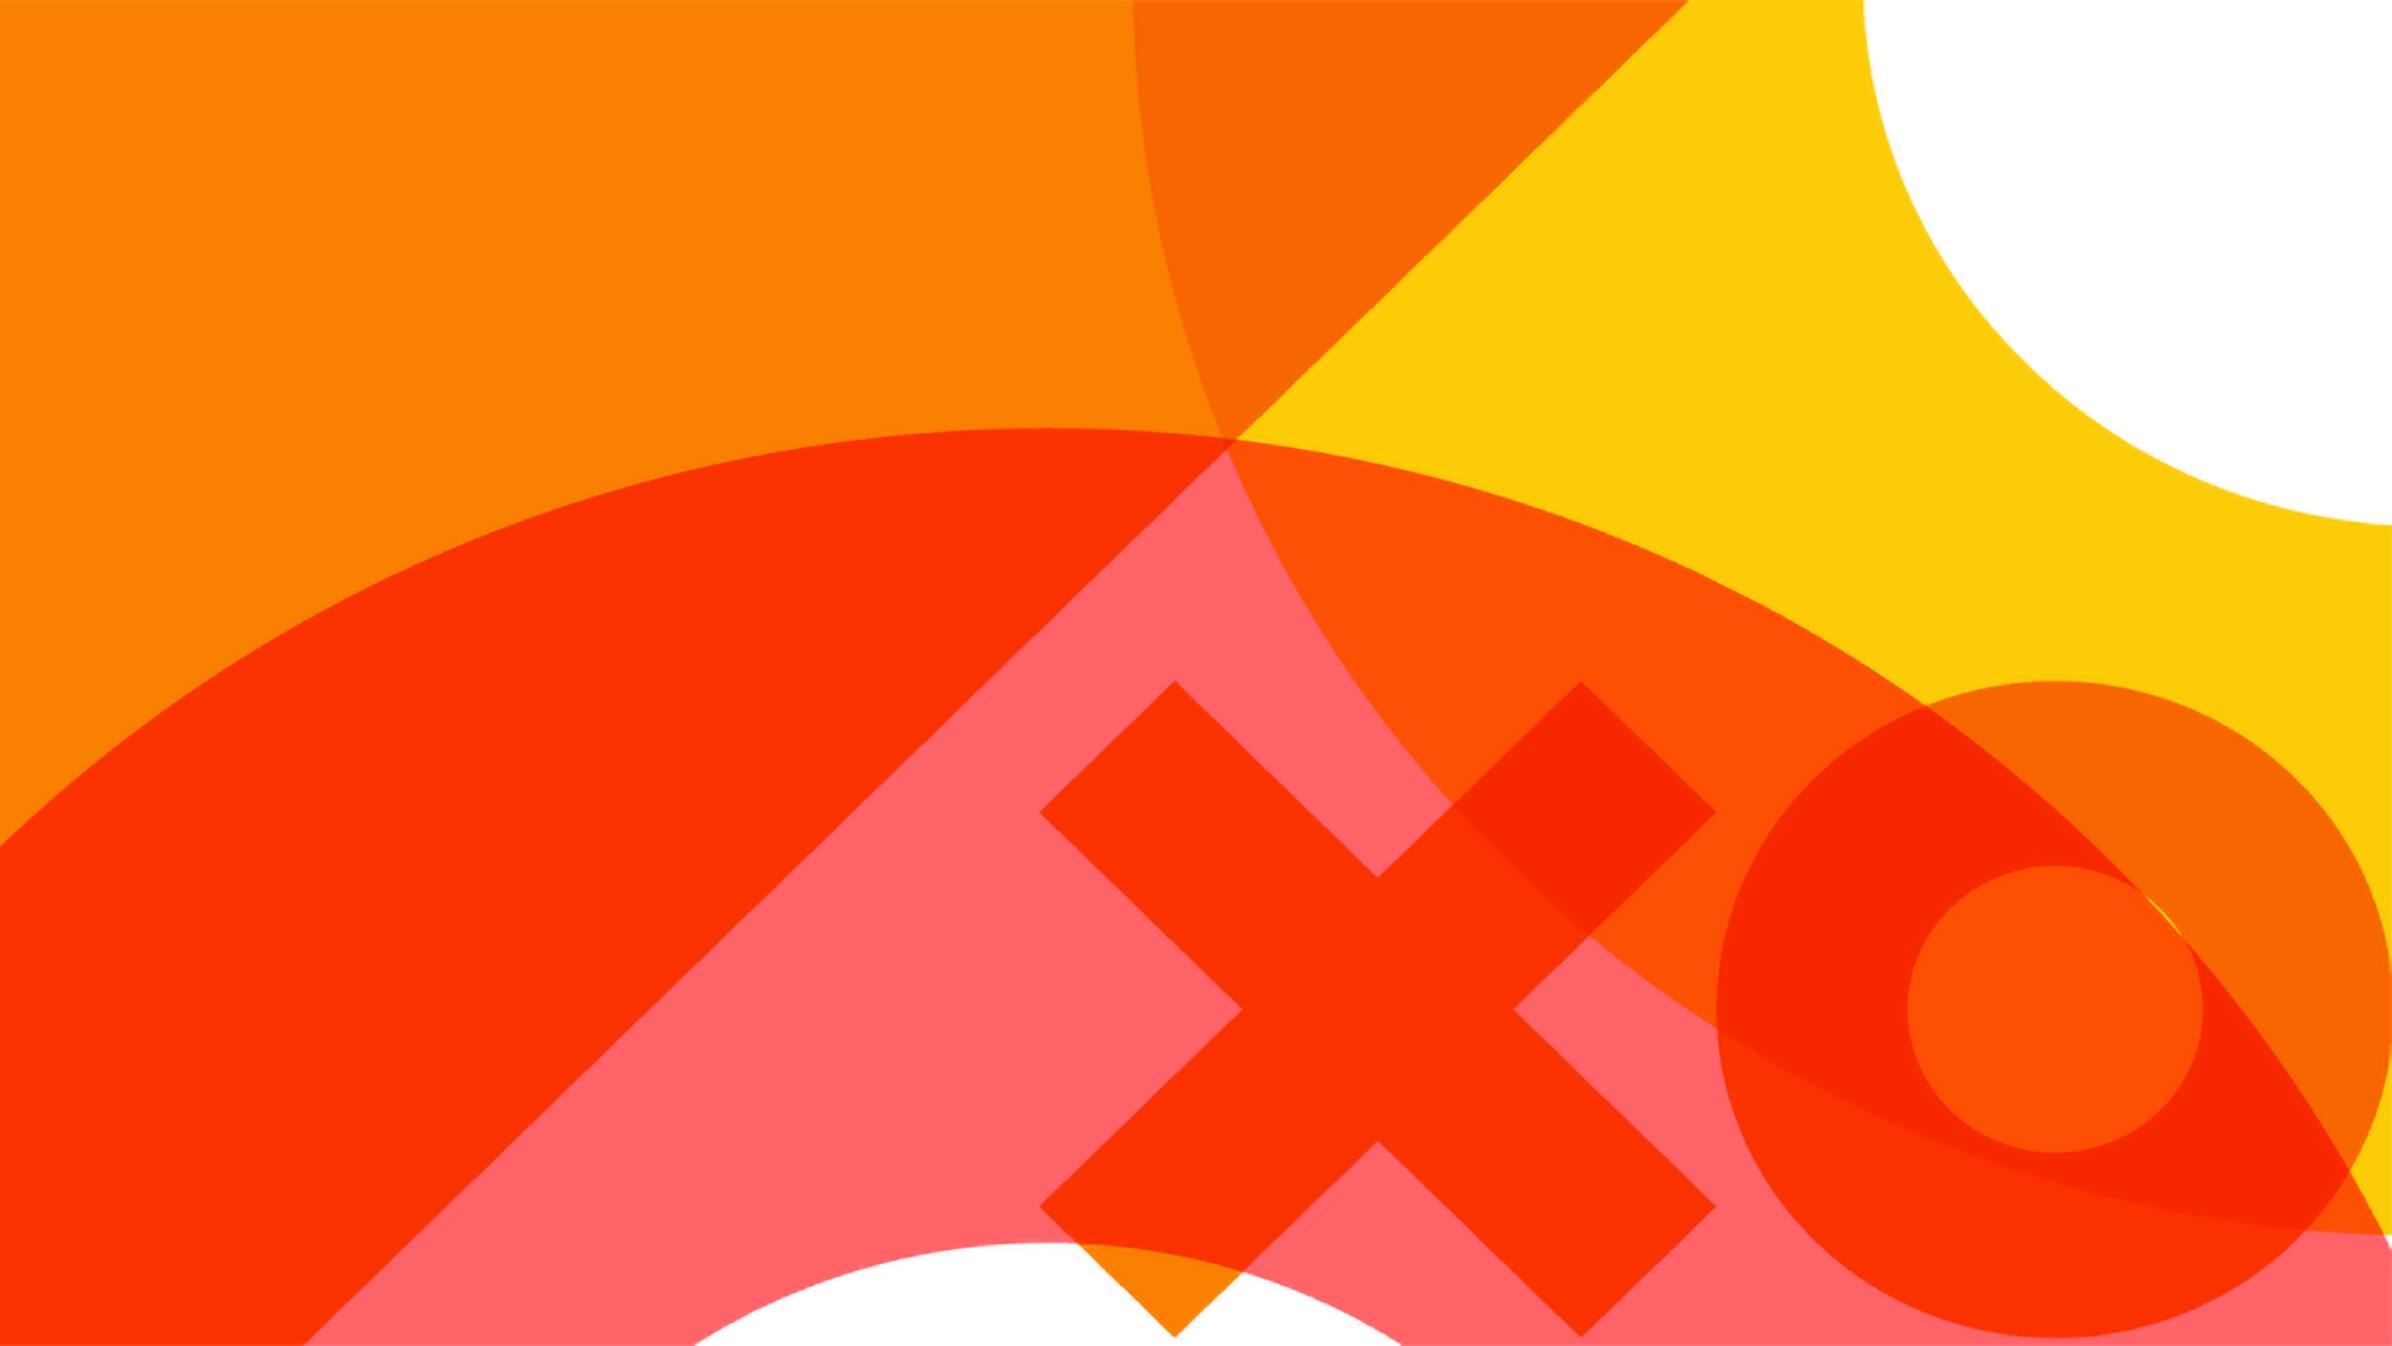 An abstract image of bright orange and yellow overlapping shapes with a nought and a cross.